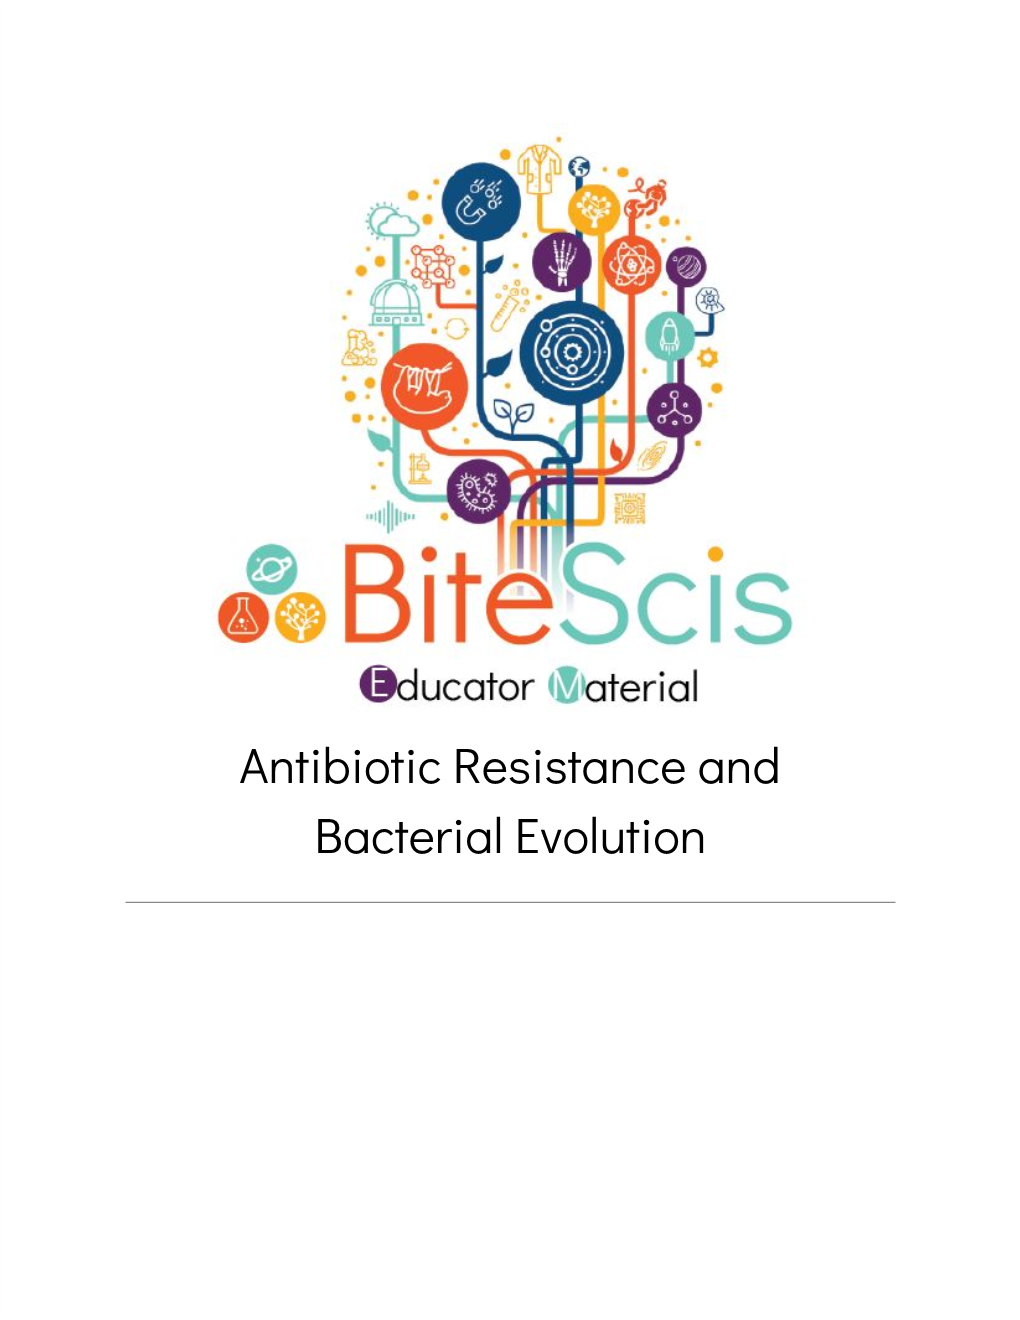 Antibiotic Resistance and Bacterial Evolution